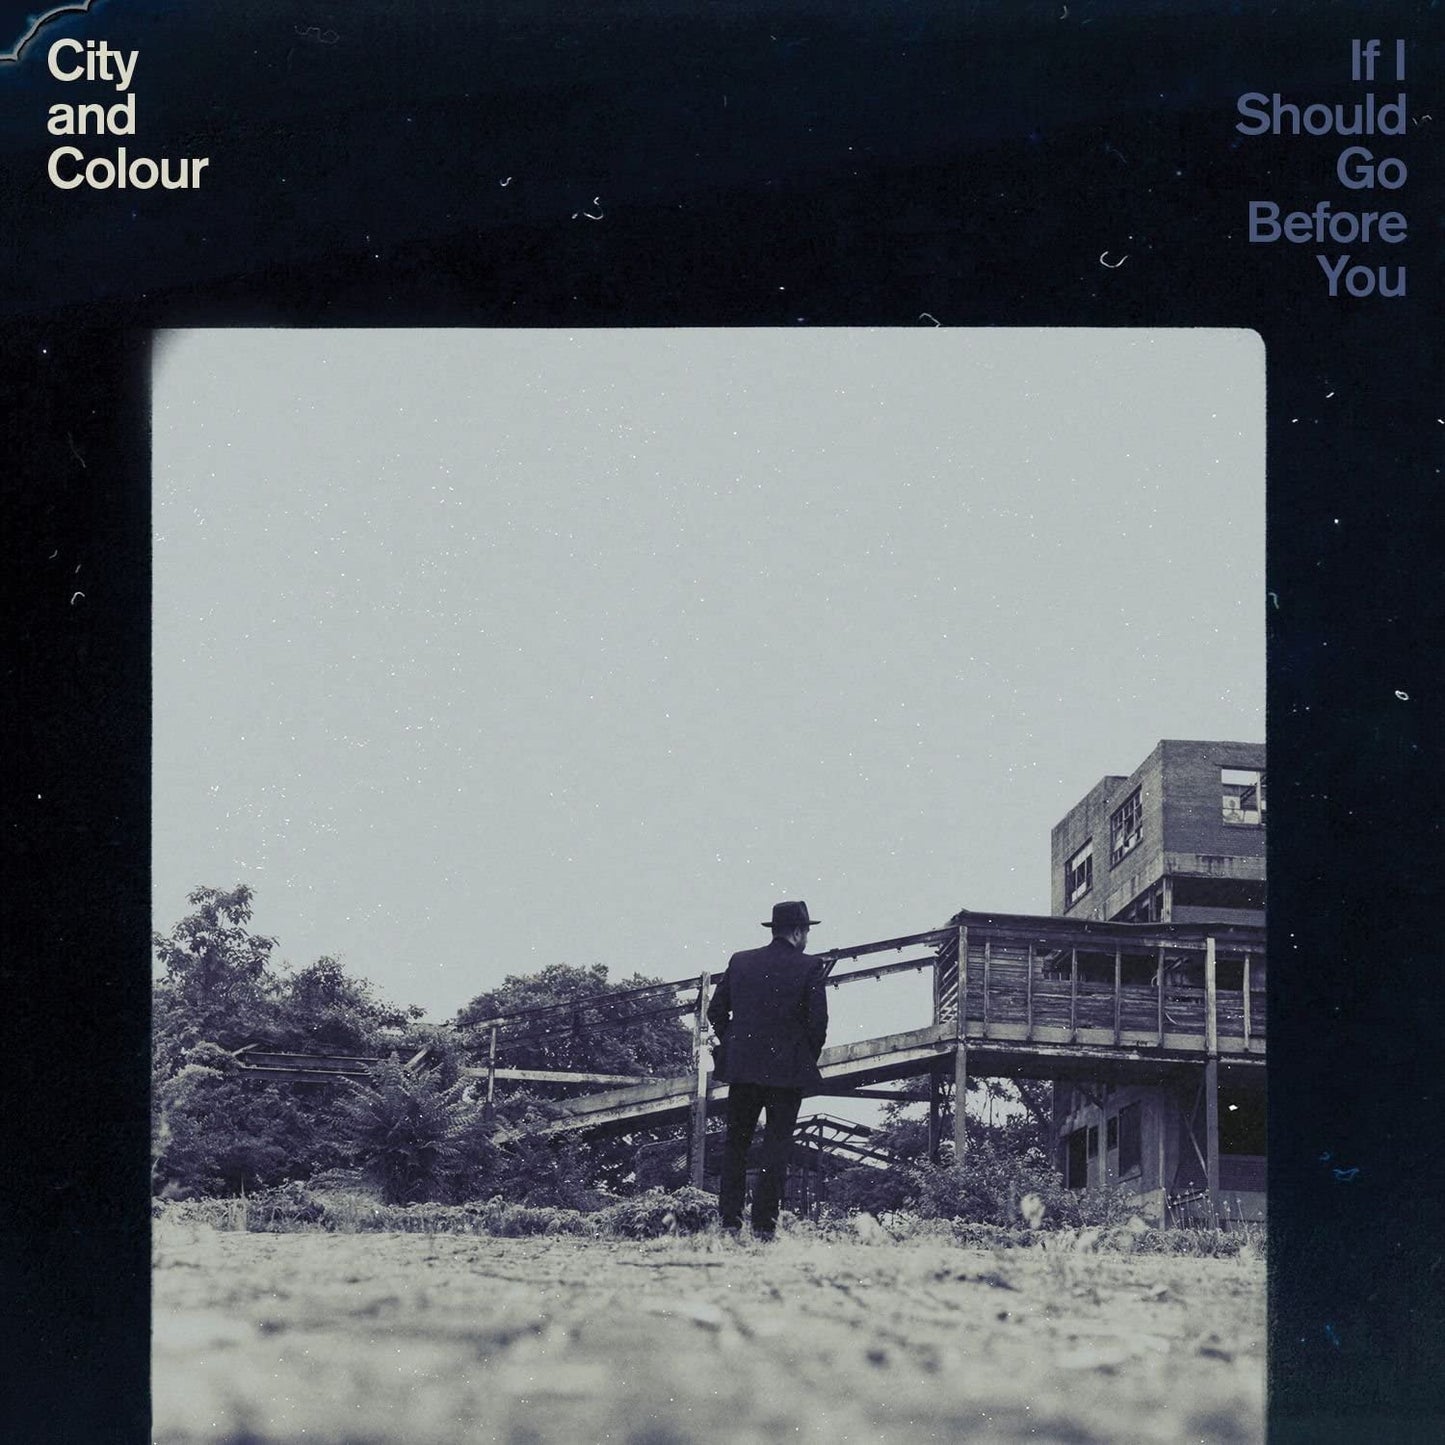 City and Colour/If I Should Go Before You [LP]